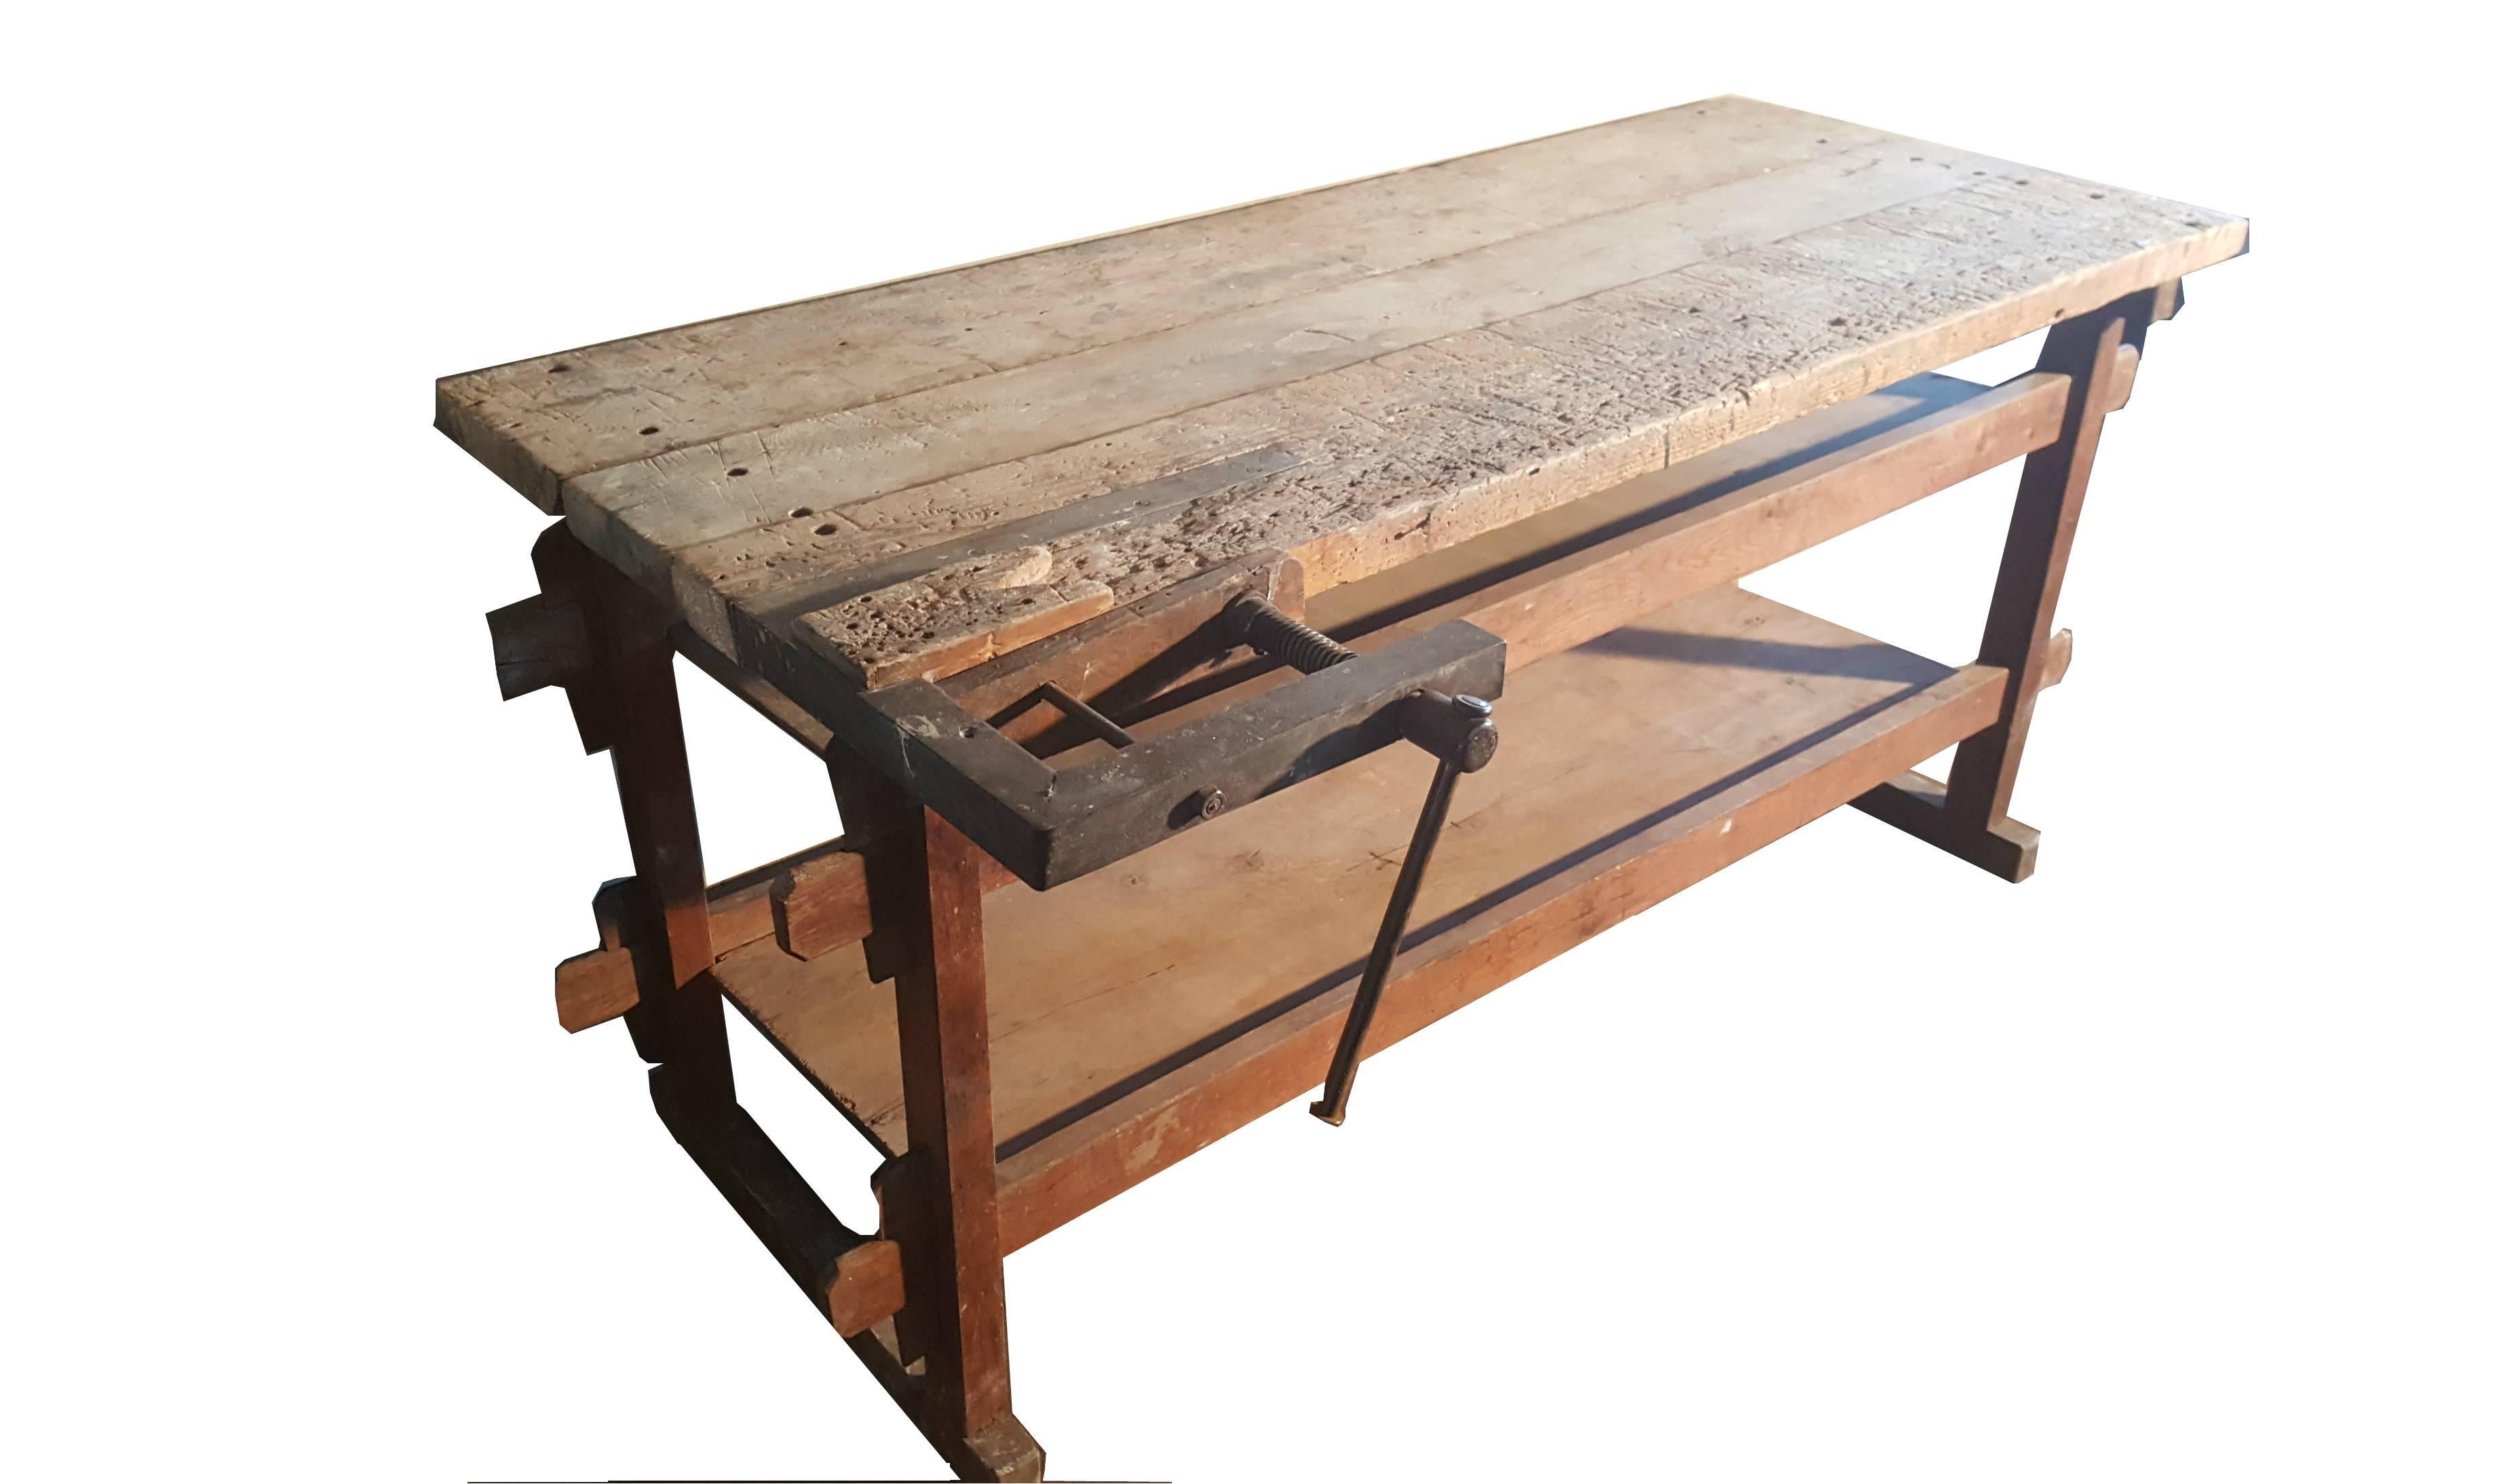 Early 20th century maple or carpenters work bench with a cast iron vise.

The table is in a charming used condition and has a good size.

It could make a creative kitchen prep table or desk. 

Measures: Height 120cm
Width 175cm
Depth